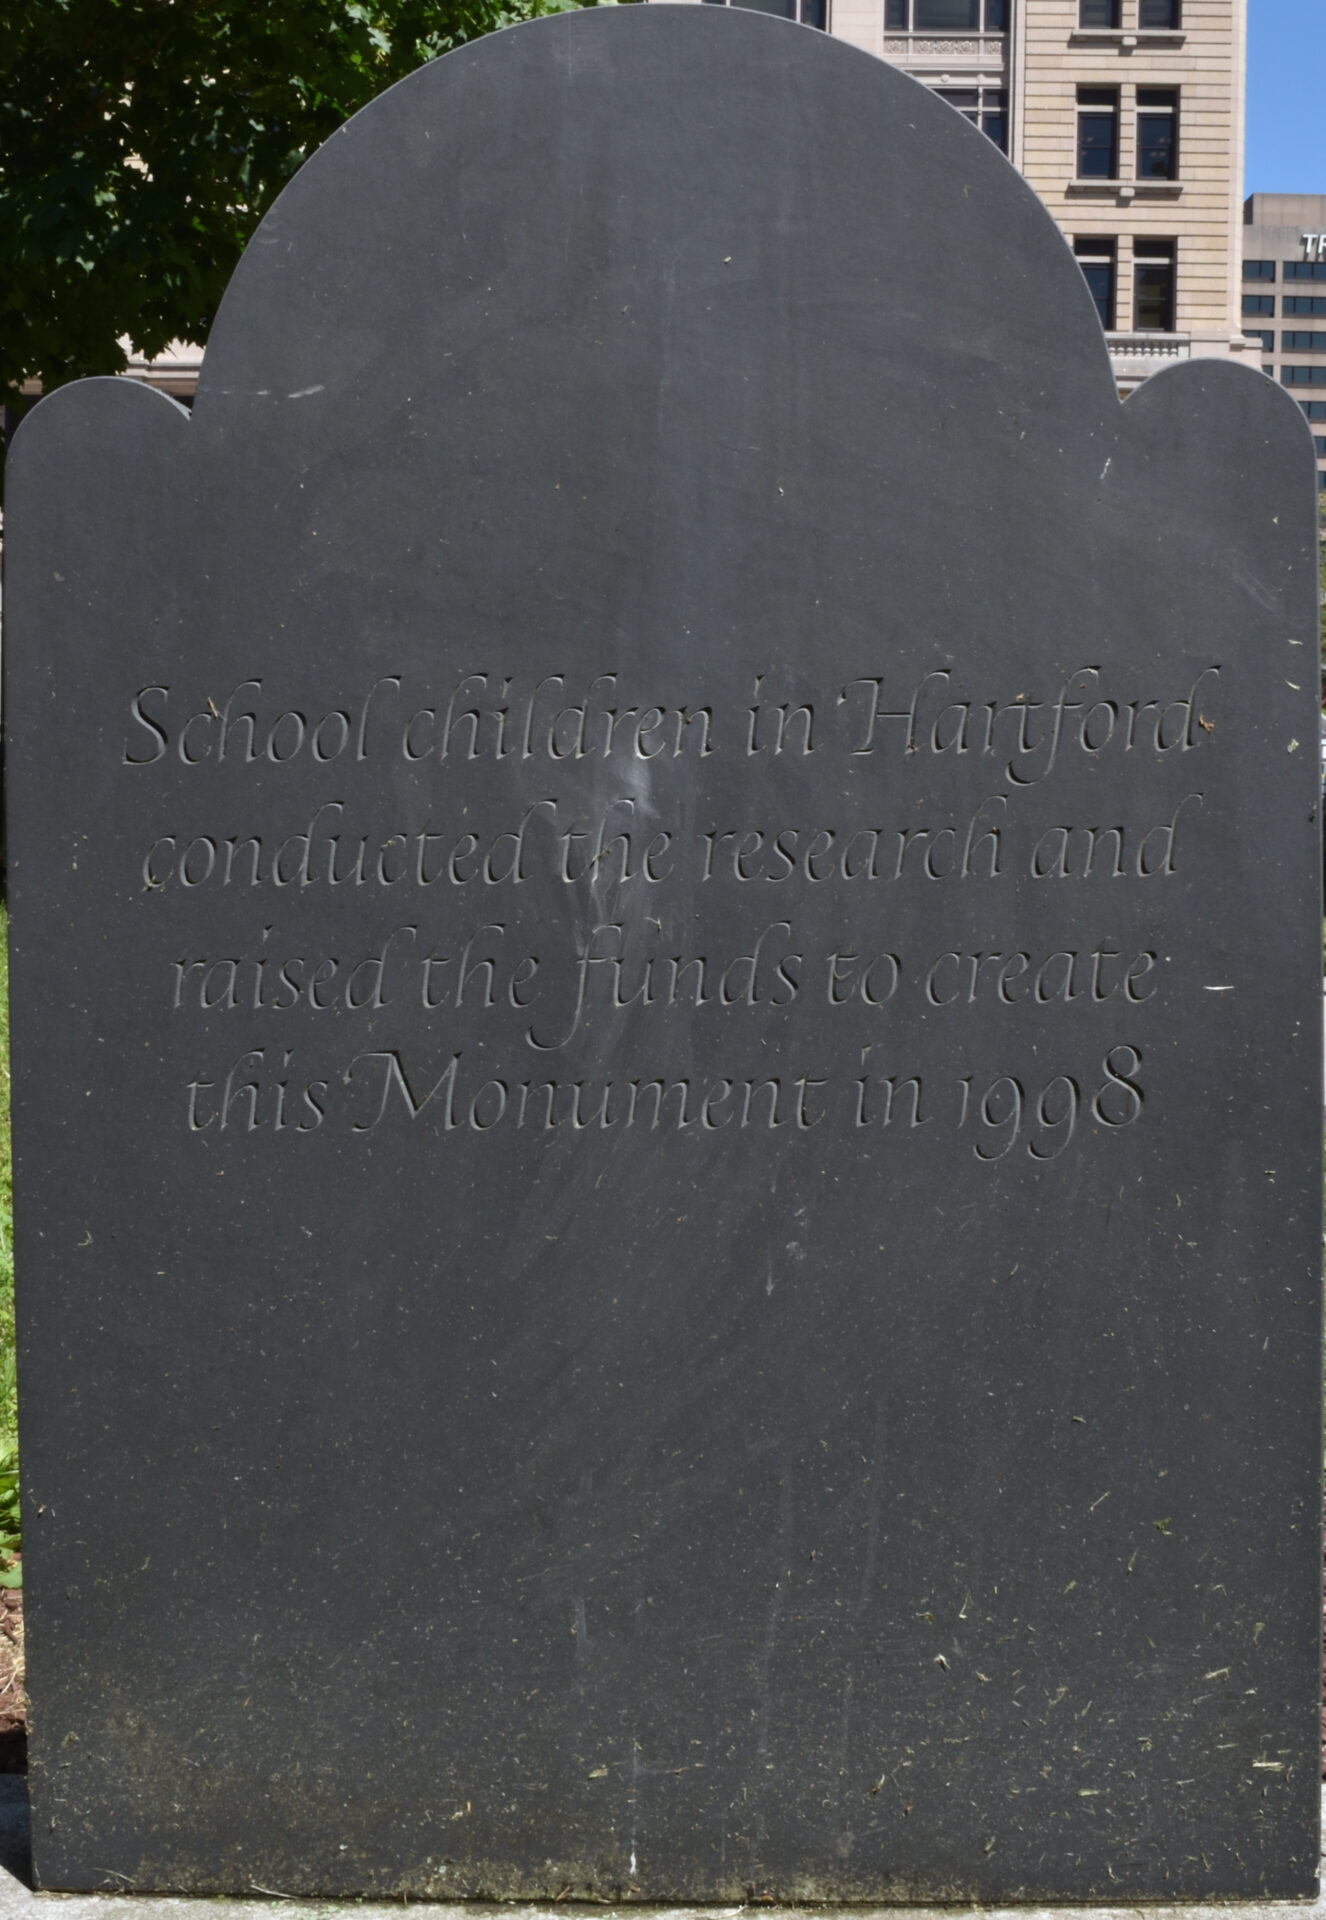 African American monument - back of headstone, inscription - "School children in Hartford / conducted the research and / raised the funds to create / this Monument in 1998"